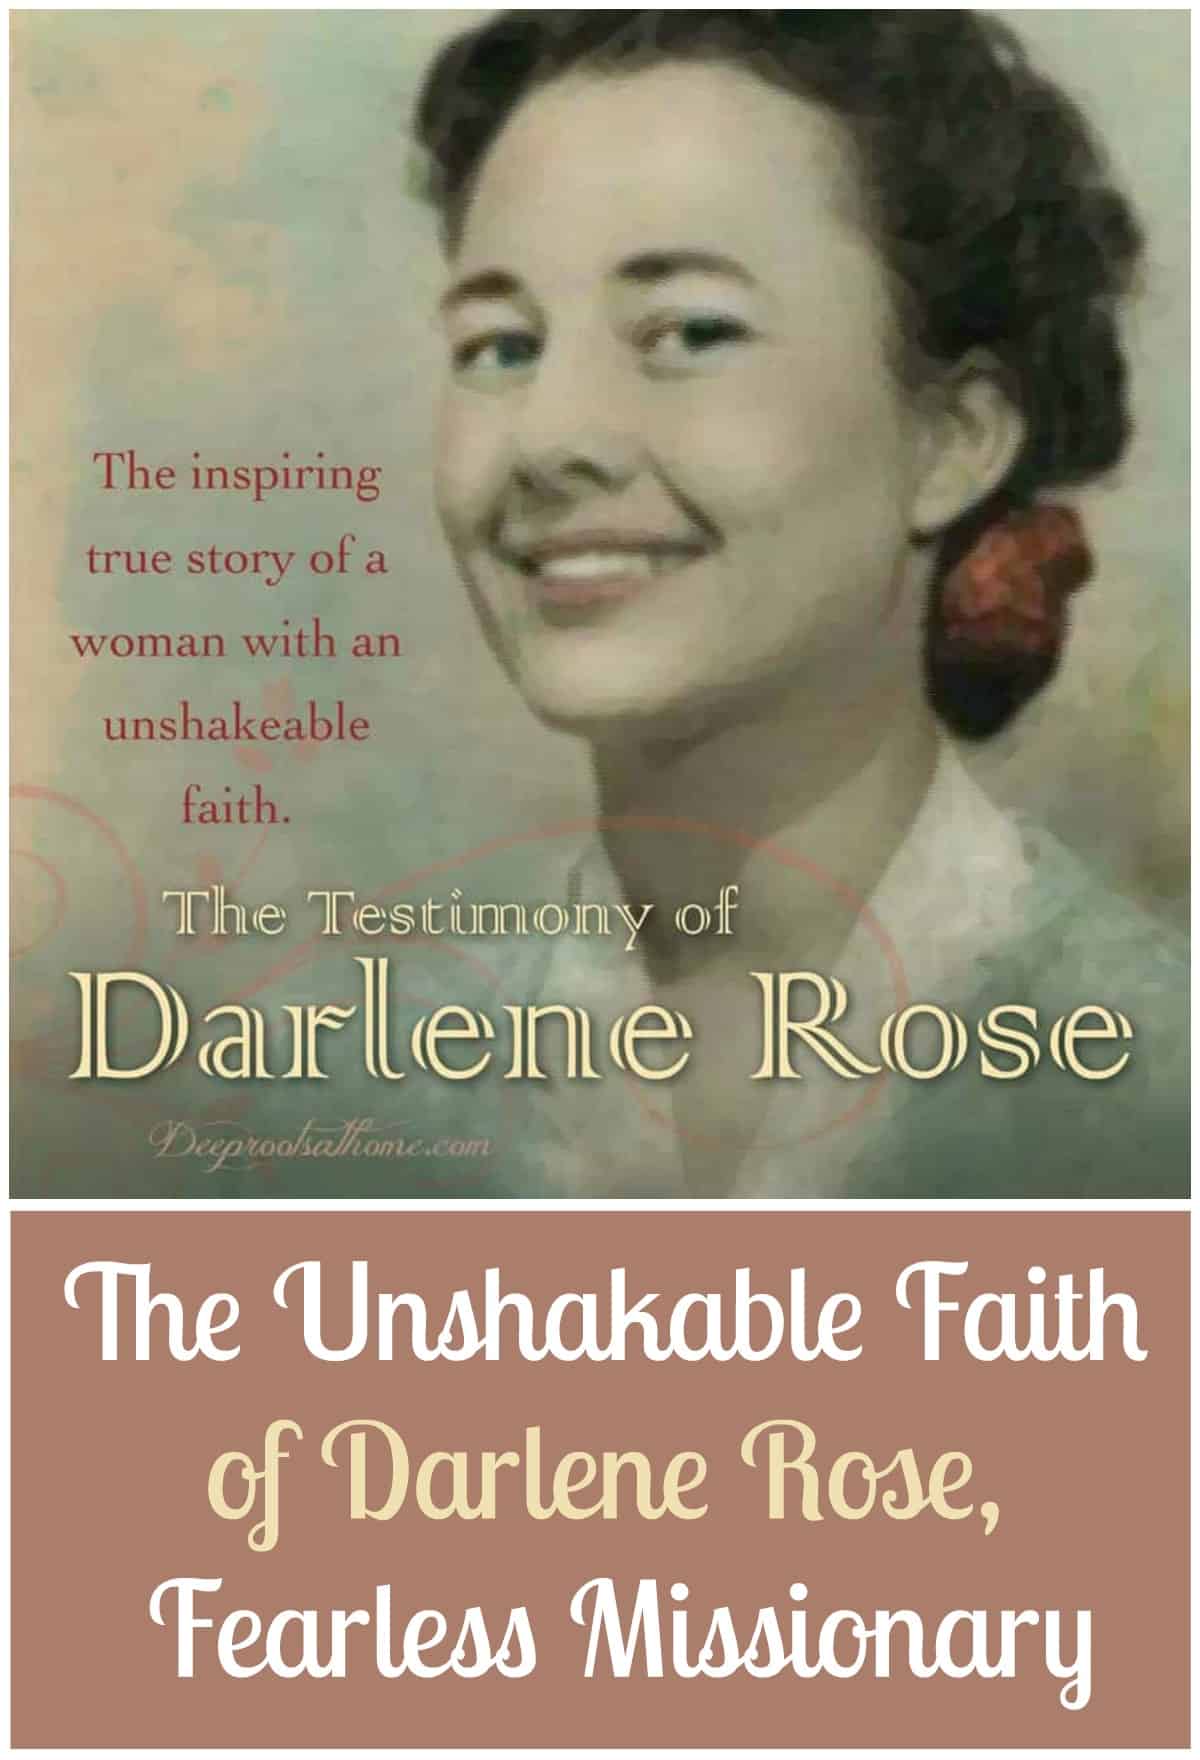 The Unshakable Faith of Darlene Rose, Fearless Missionary. A smiling Darlene Diebler Rose and her testimony of faith.